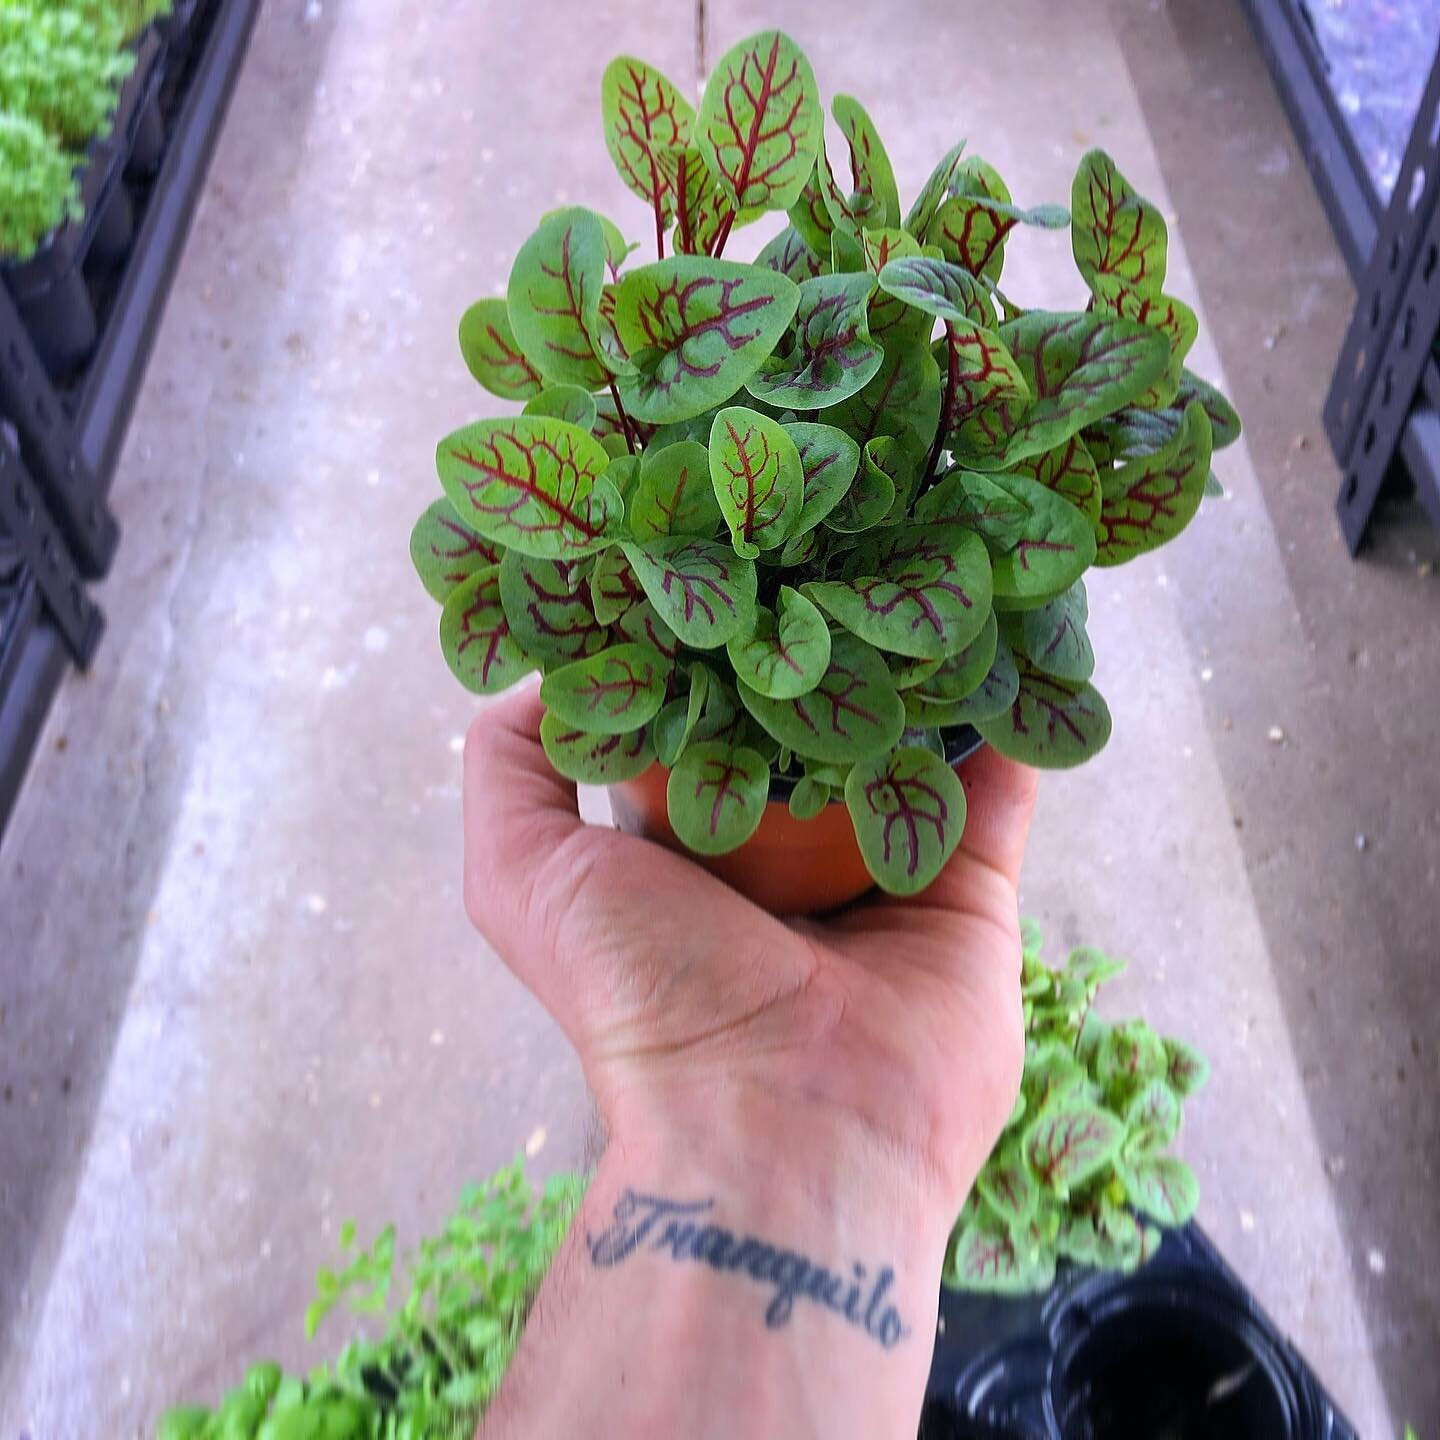 &ldquo;Mmmmm&hellip; Tangy!&rdquo; 
That&rsquo;s how @costasworld described Red Vein Sorrel when he tried ours in 2019. He wasn&rsquo;t lying! I explained to him why, for me, it is such an amazing Microgreen despite losing some of its popularity with